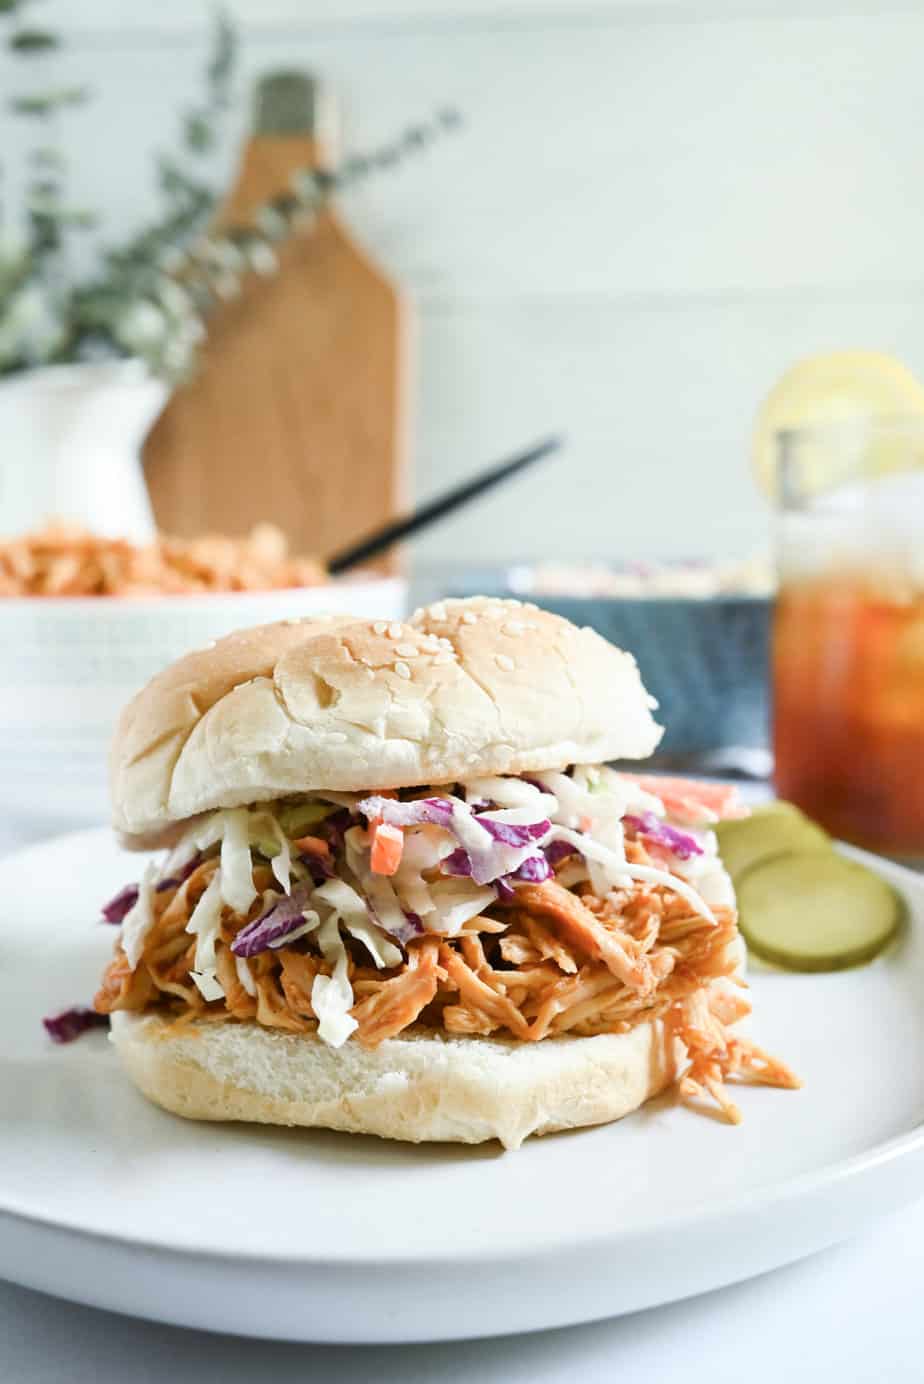 Crockpot pulled chicken sandwich on a bun, topped with slaw, next to a glass of iced tea.